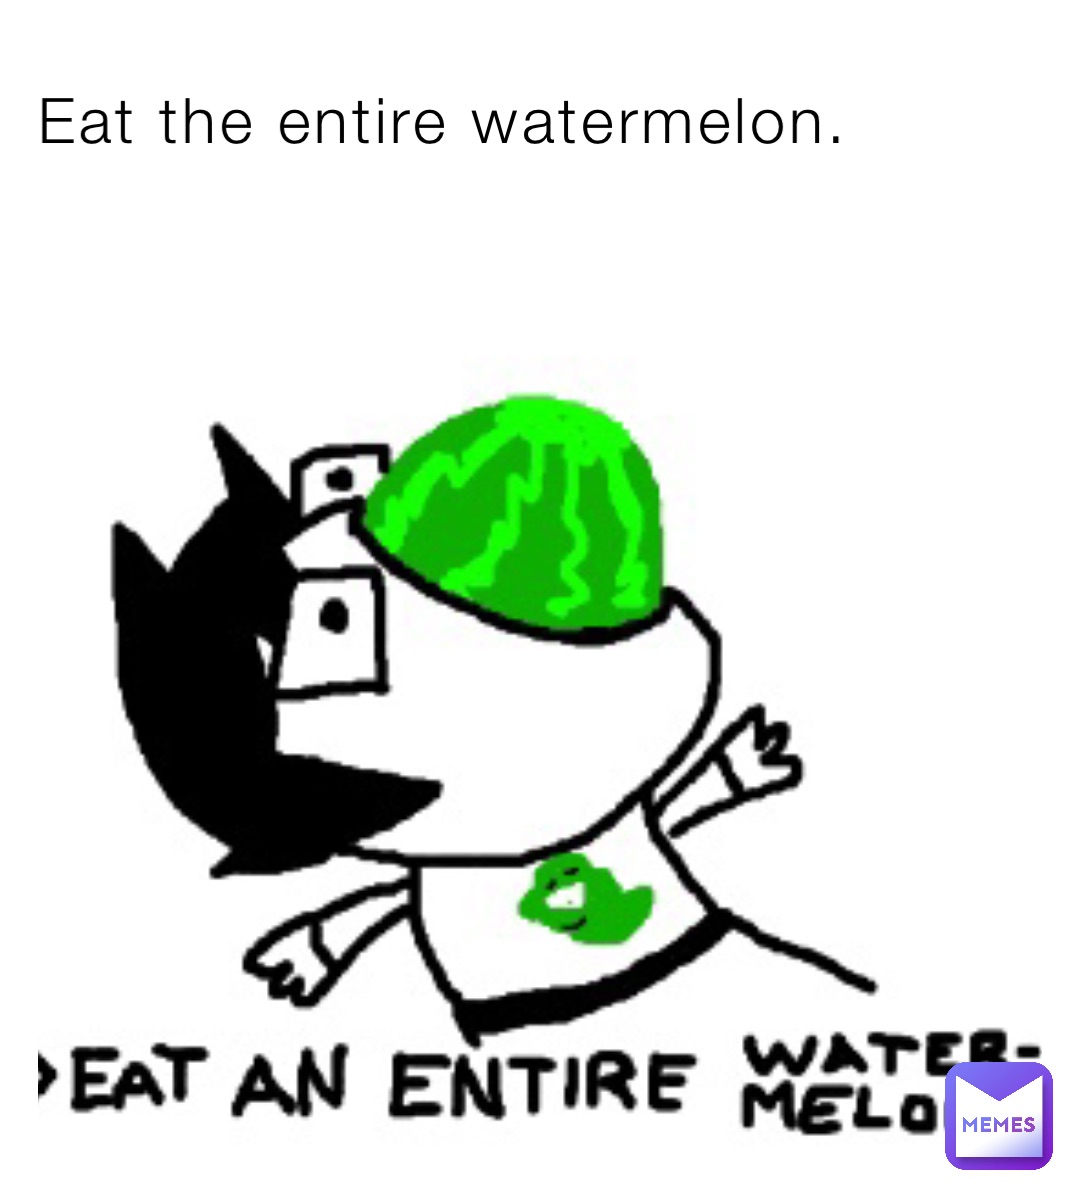 Eat the entire watermelon.